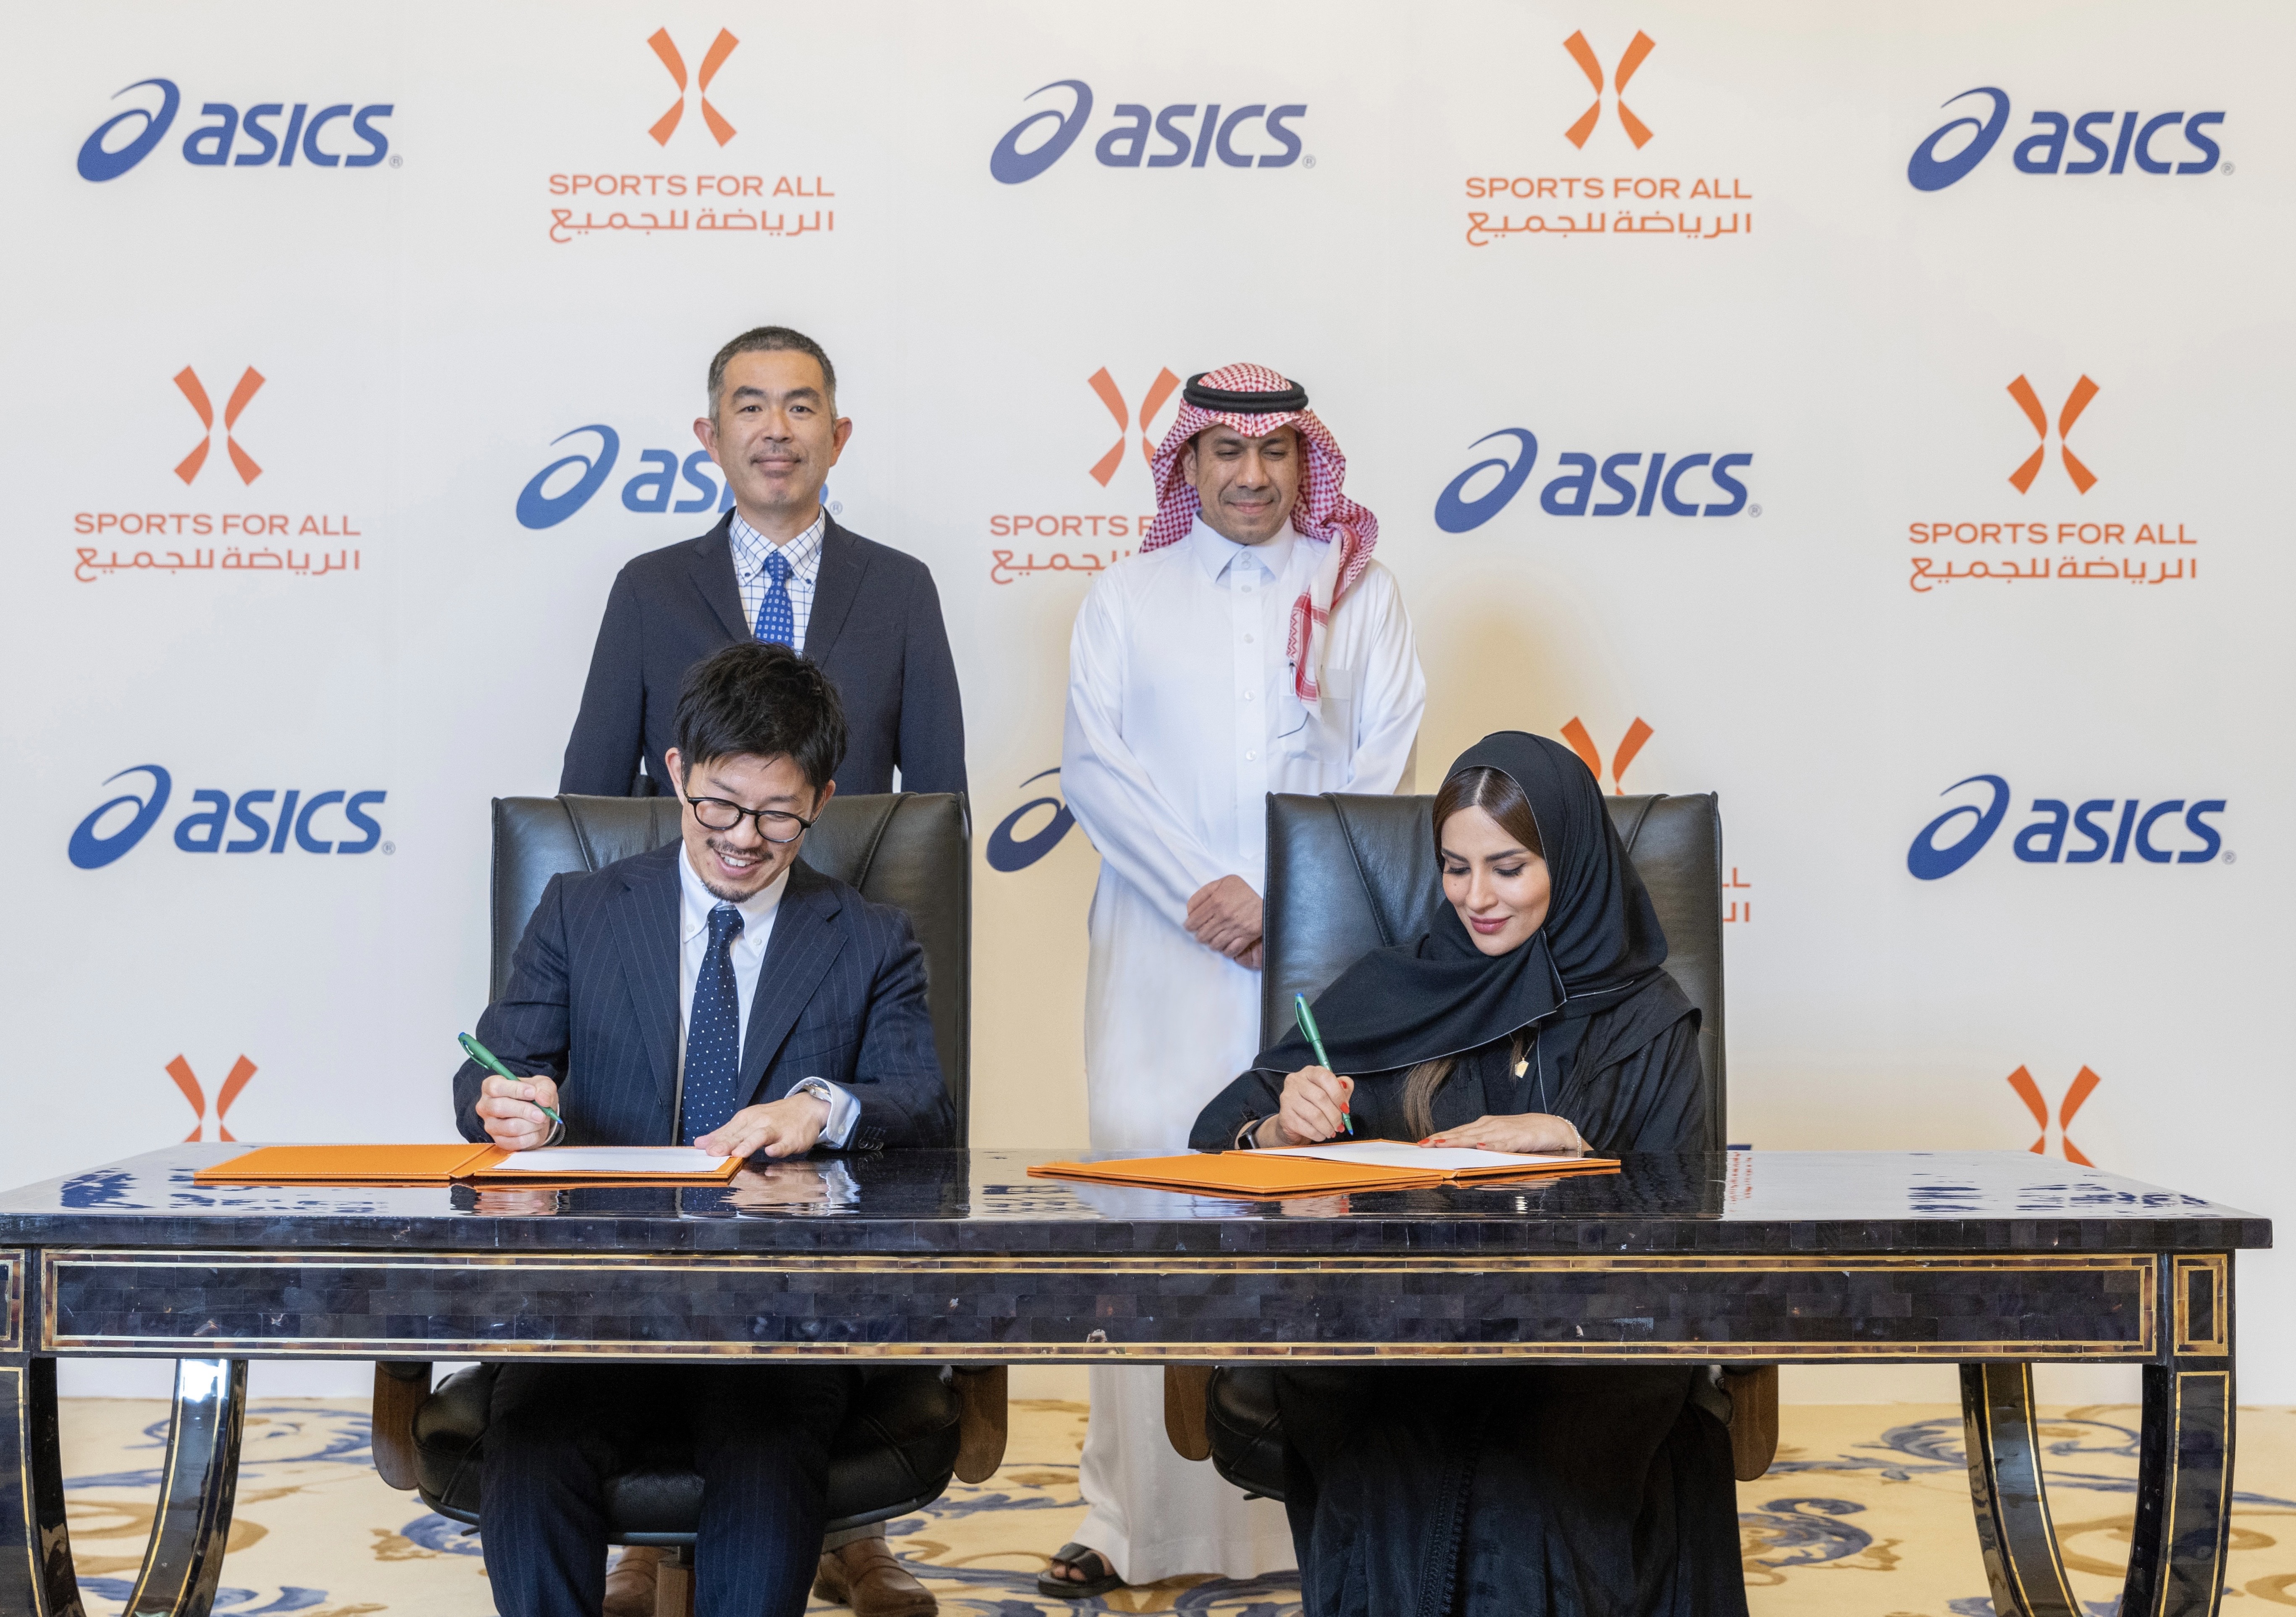 SAUDI SPORTS FOR ALL TEAMS UP WITH ASICS TO ENHANCE COMMUNITY SPORTS IN SAUDI ARABIA